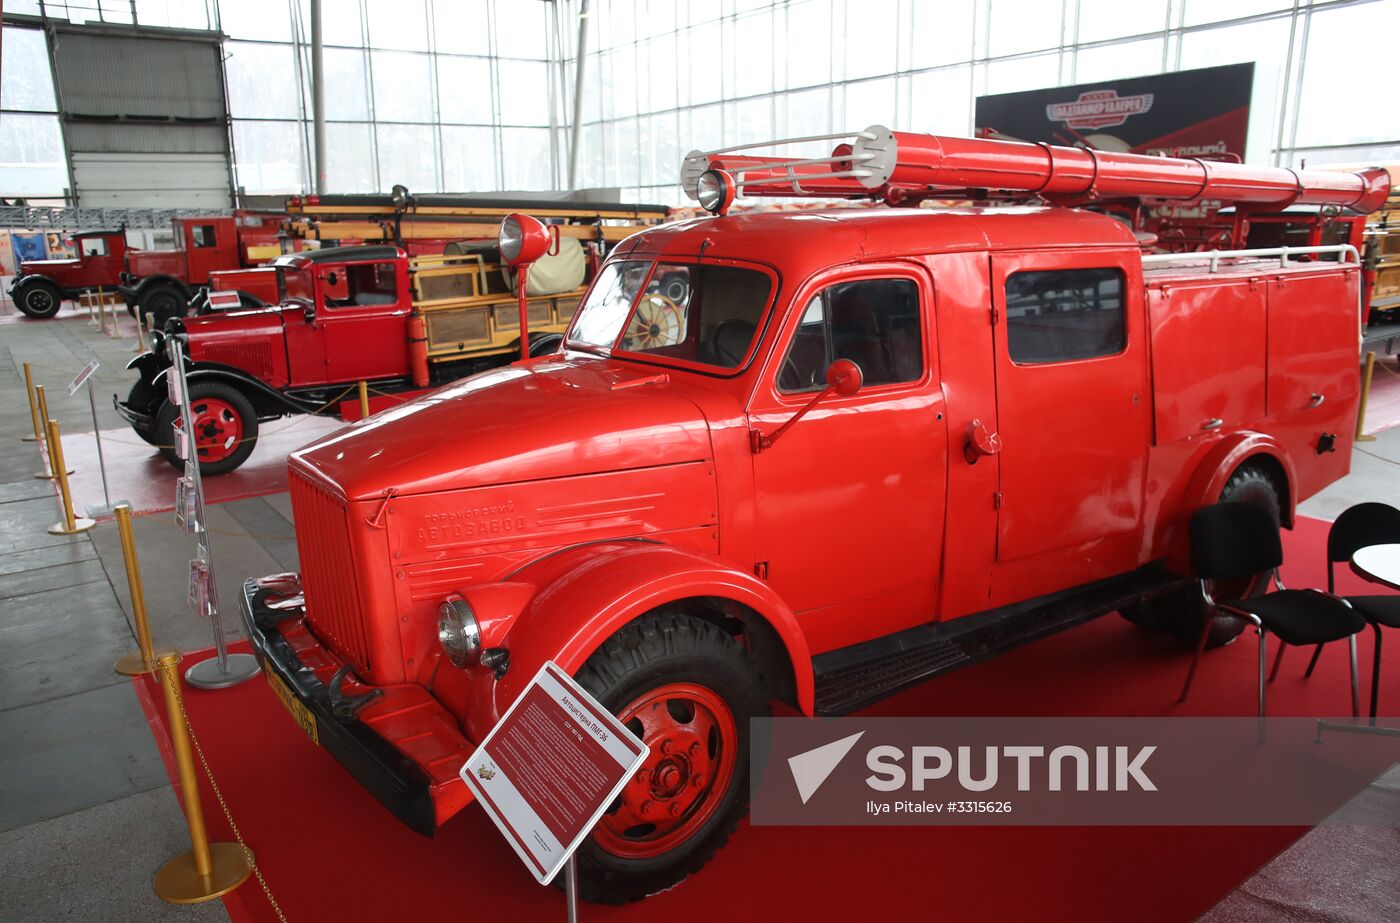 27th Oldtimer Gallery exhibition